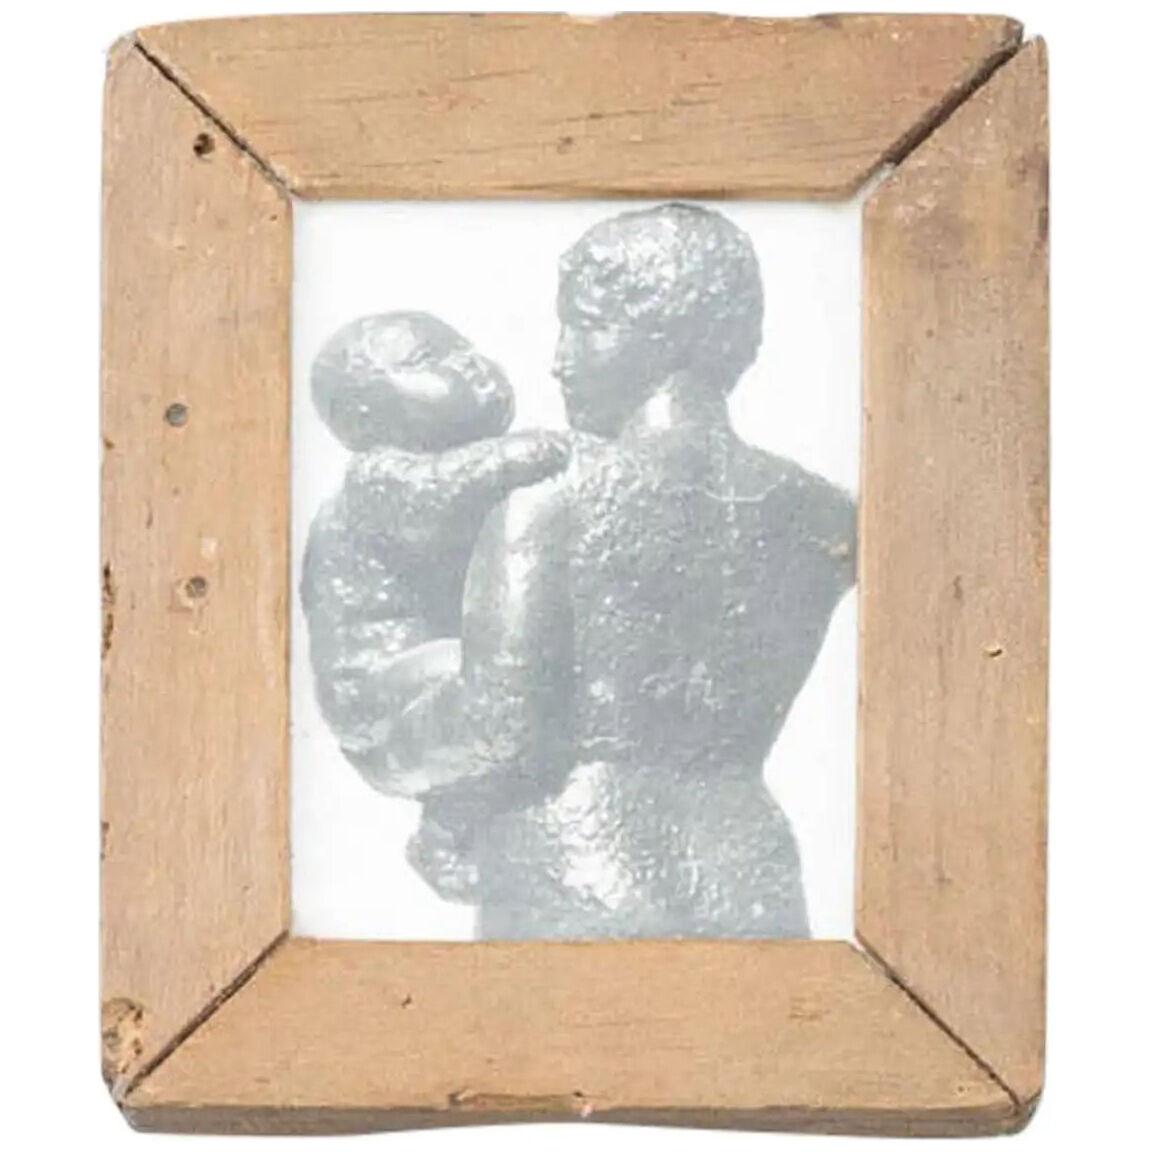 Manolo Hugué Archive Photography of Sculpture, Free Shipping